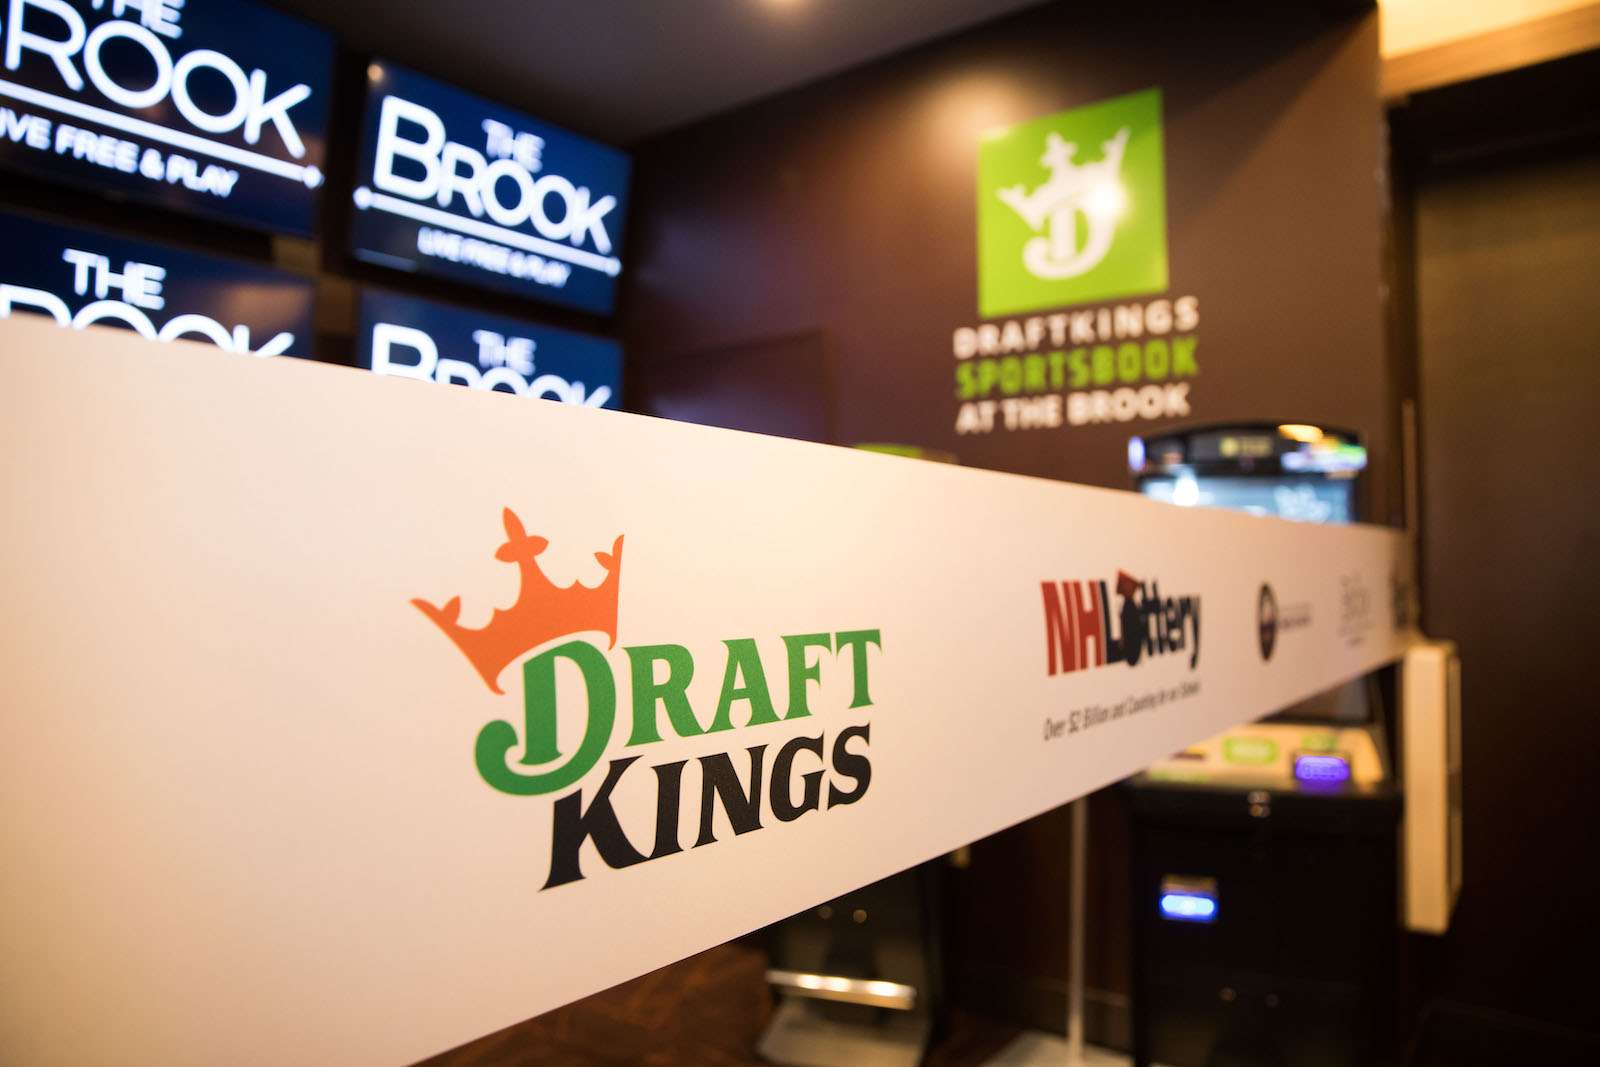 What Are Crowns In Draftkings